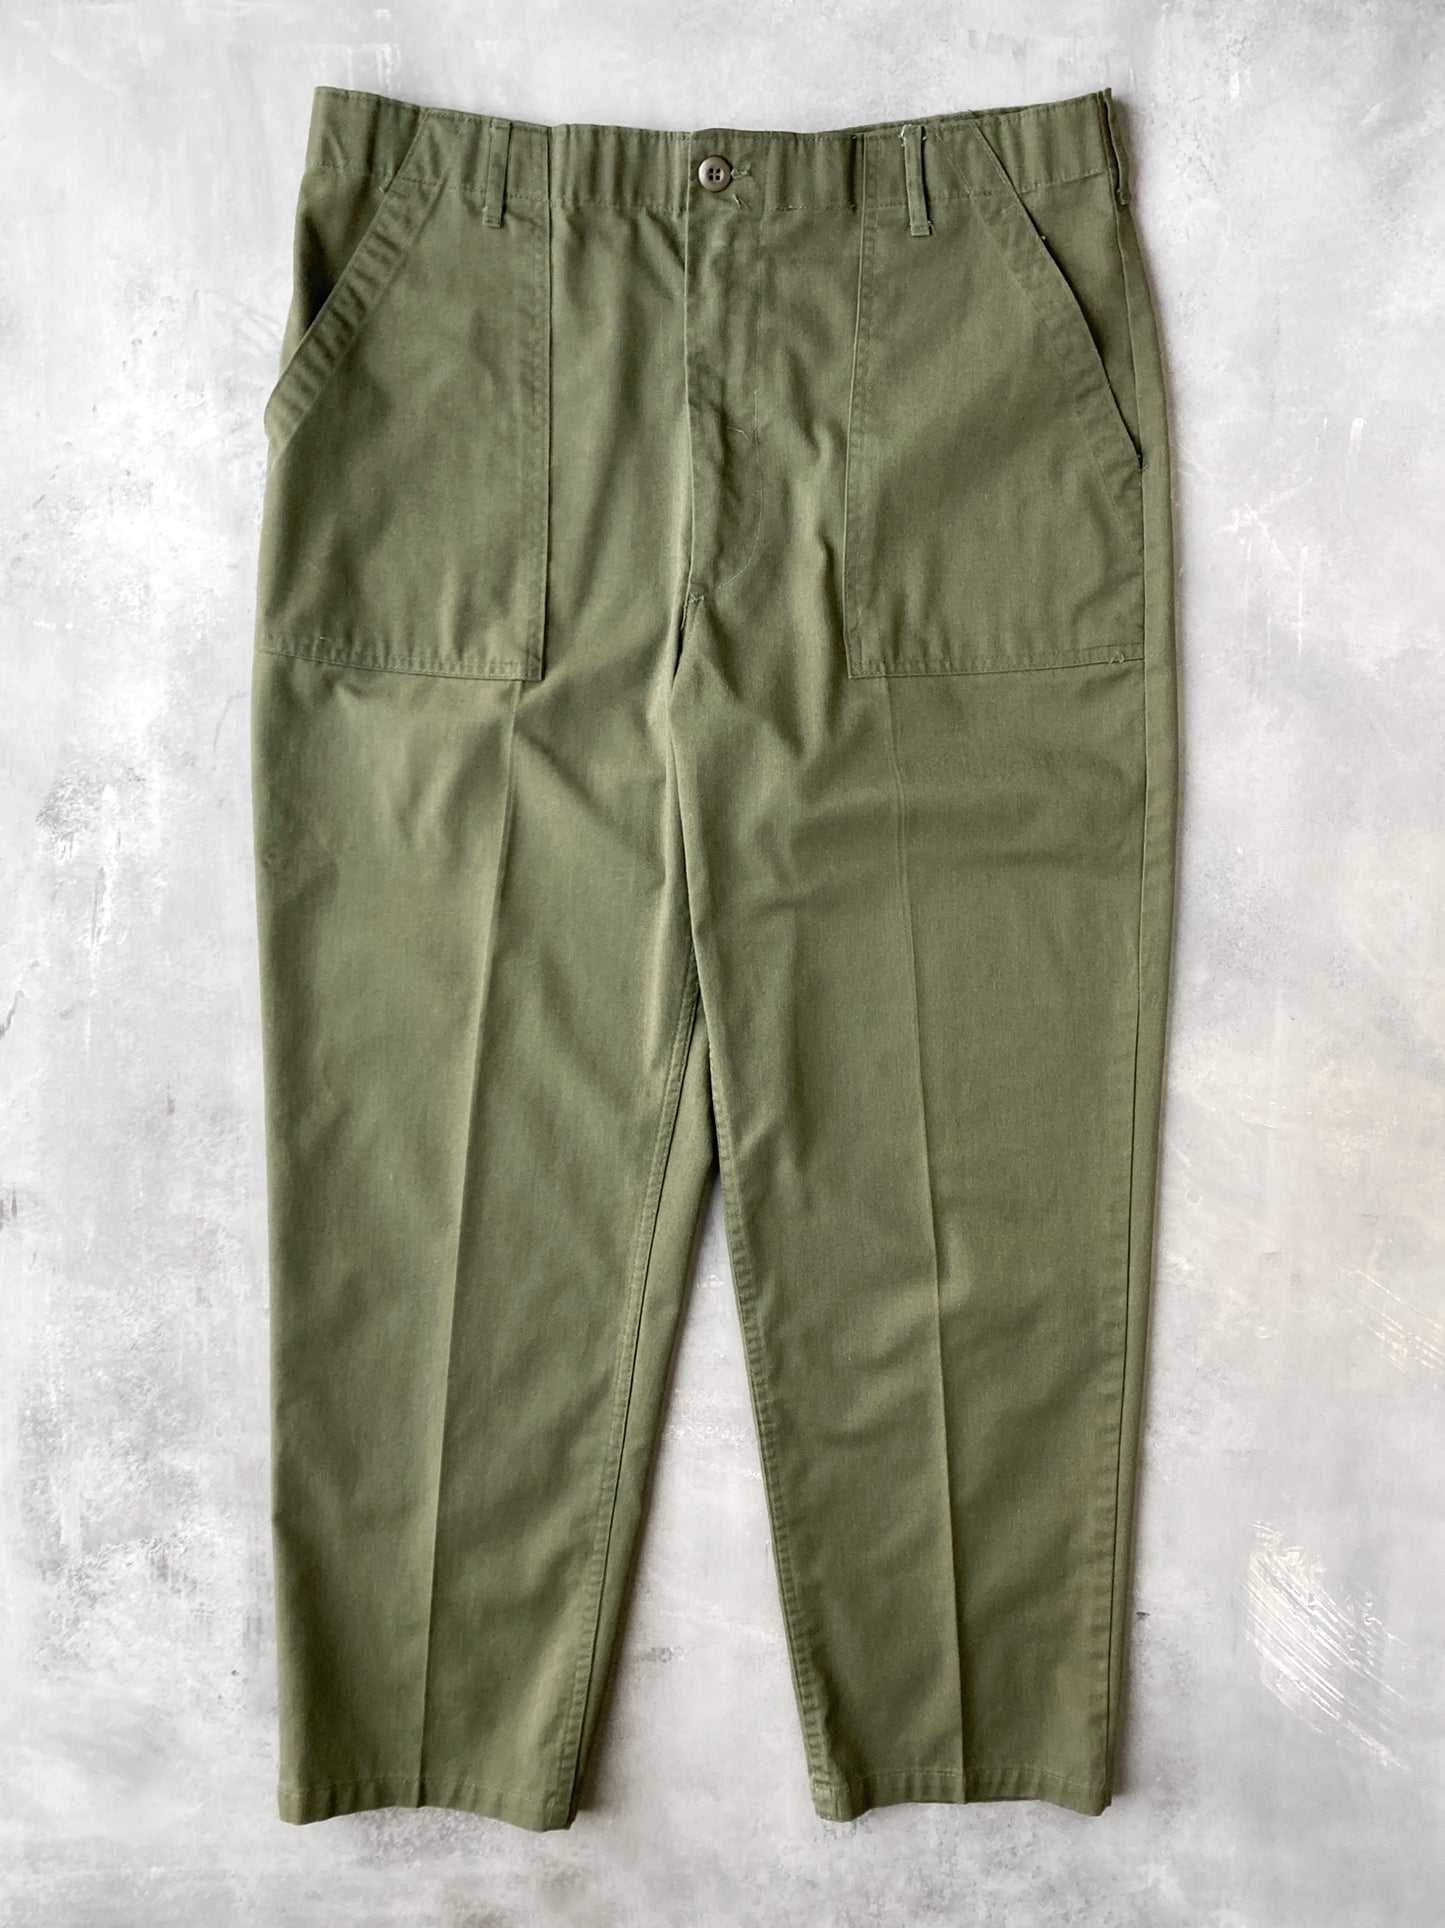 Military Trousers 70's - 38 x 30